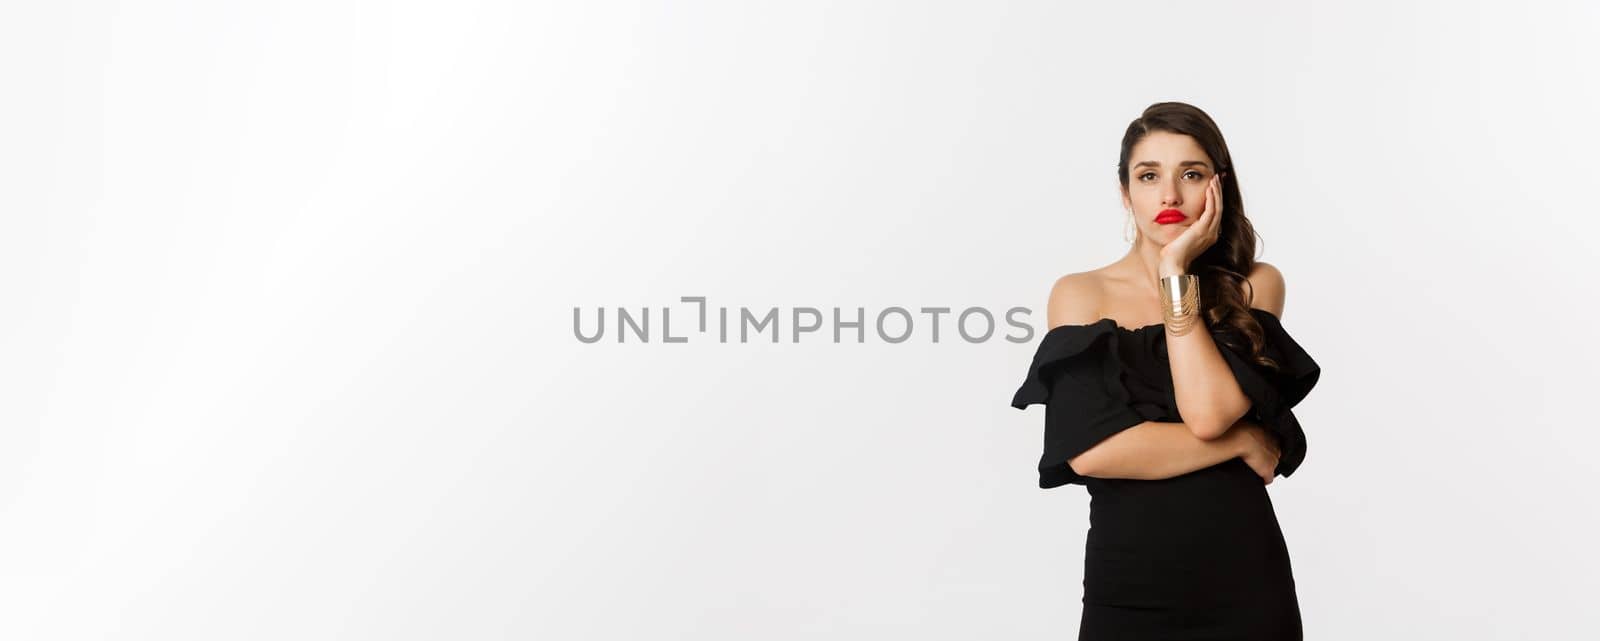 Fashion and beauty. Bored stylish woman in makeup, black dress, waiting for something, looking sad and gloomy, standing against white background by Benzoix